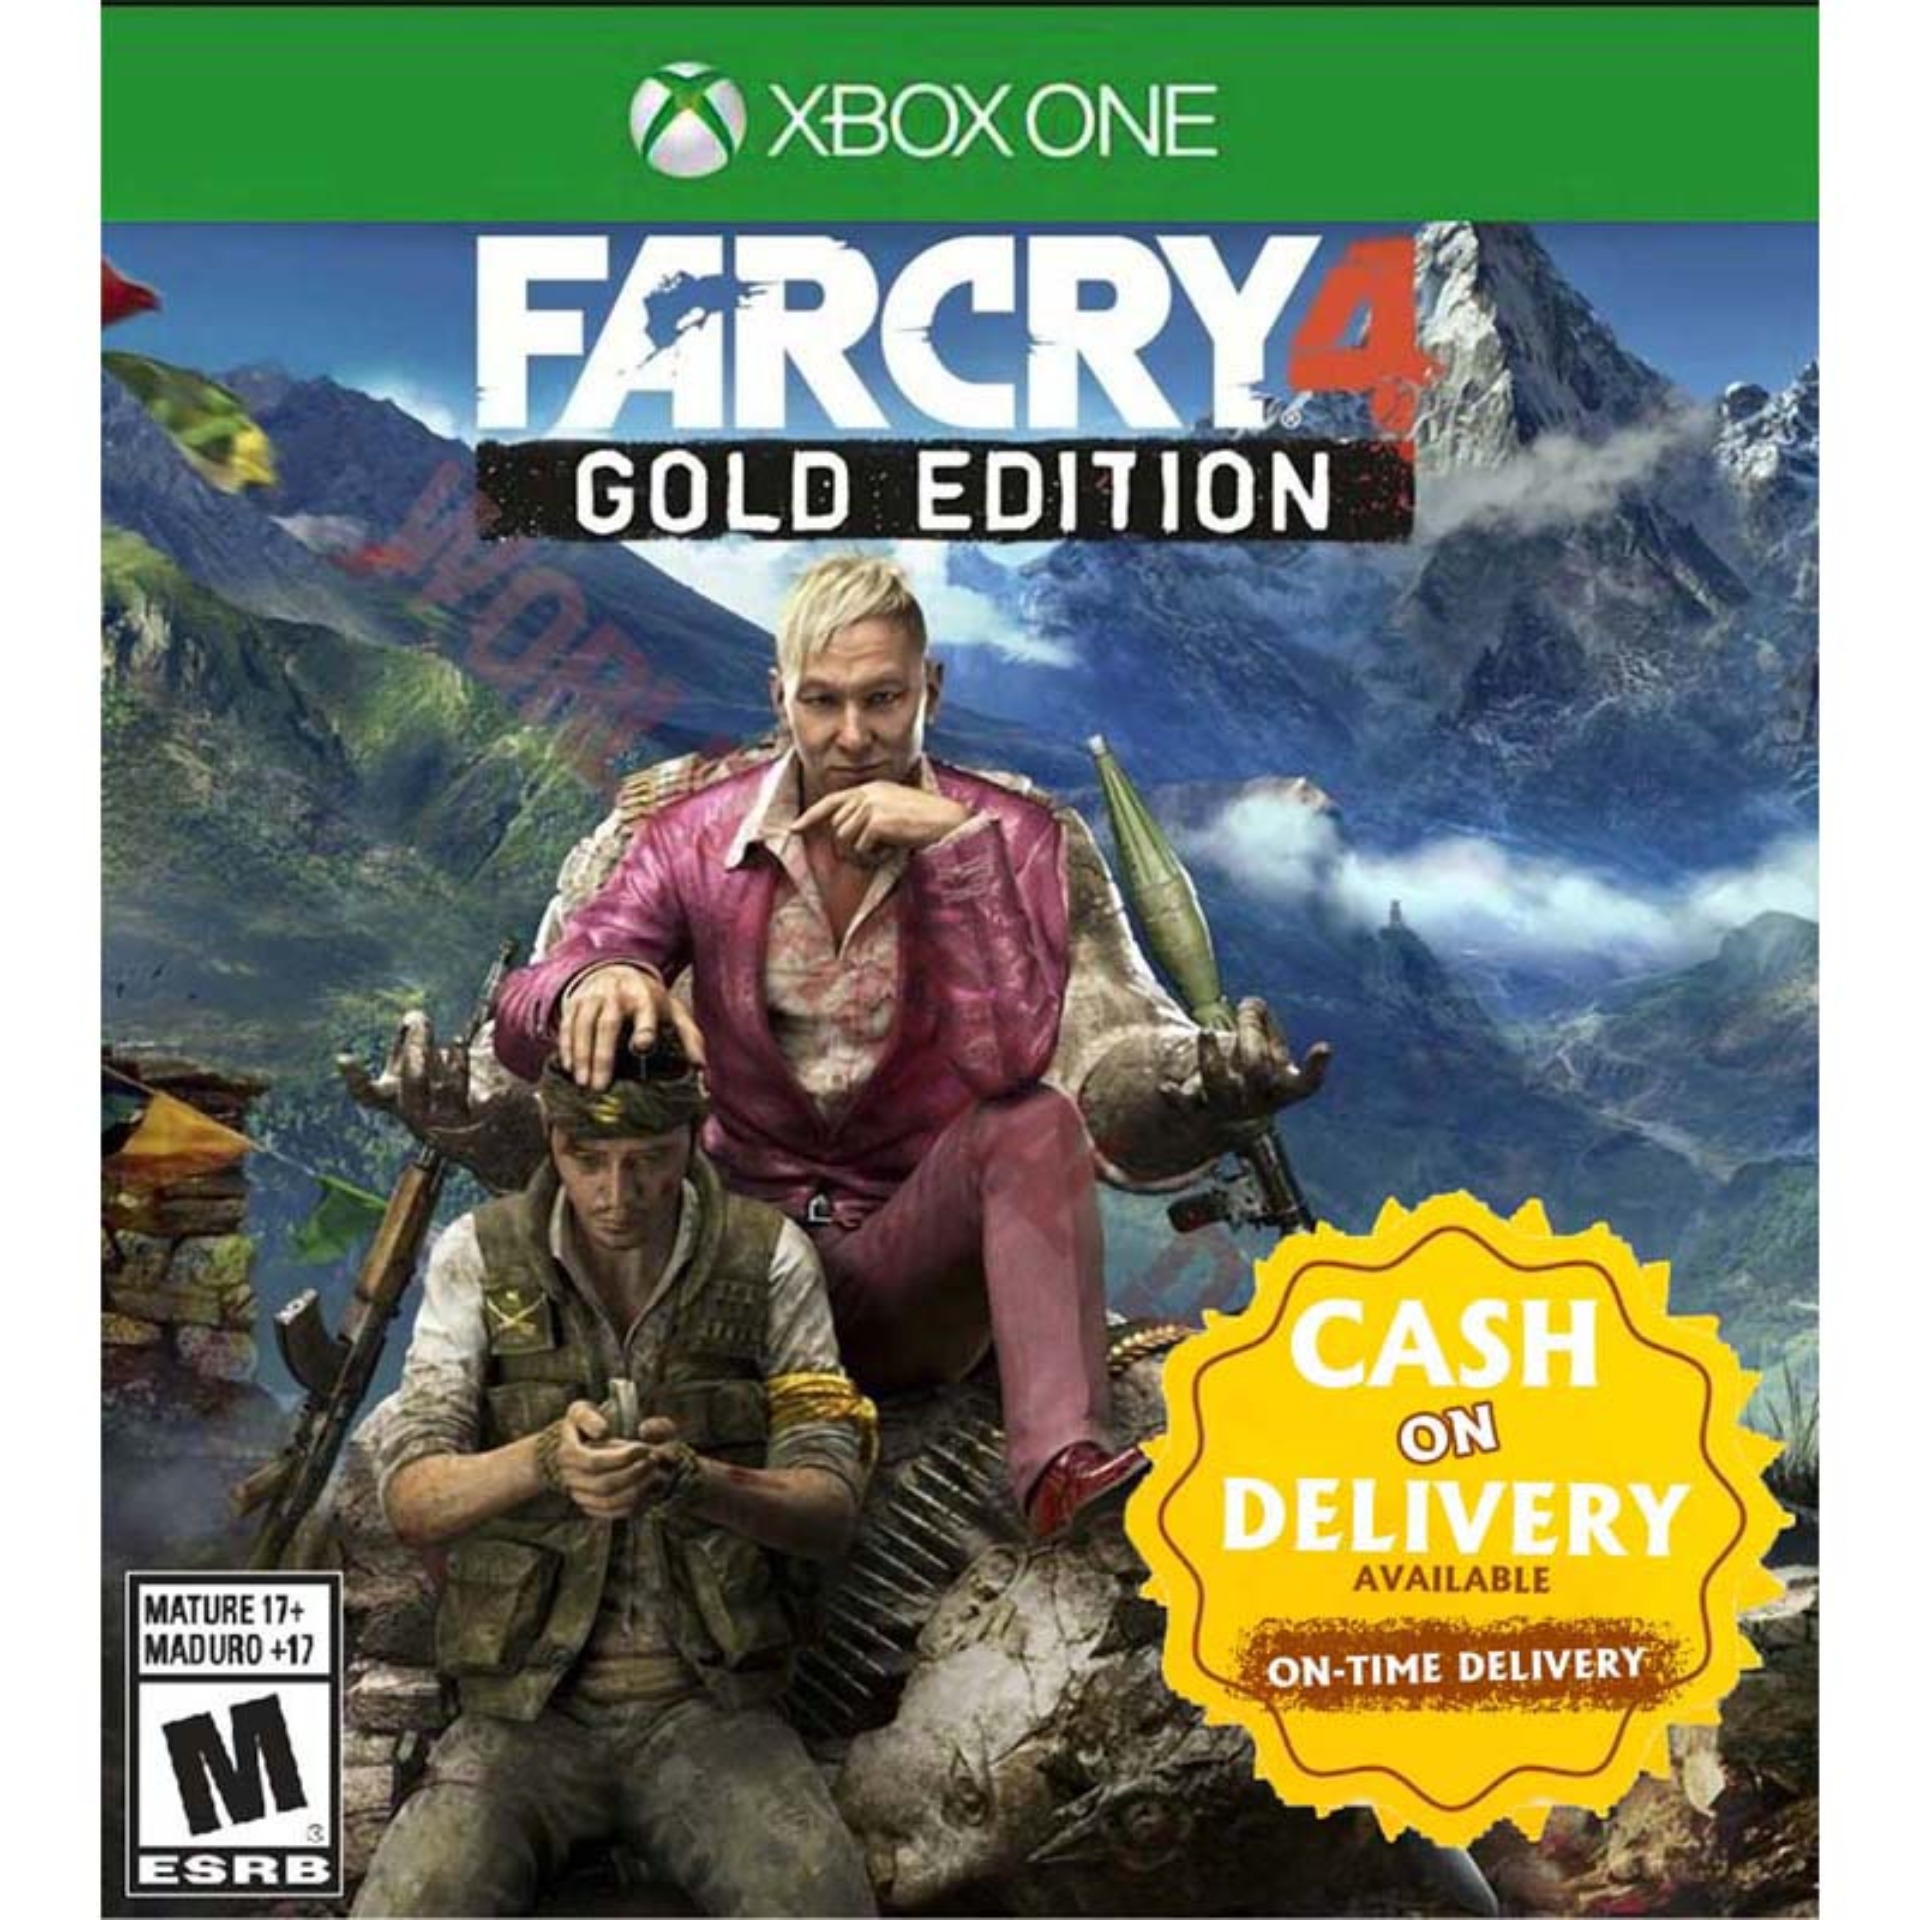 Far Cry 4 Gold Edition Xbox One Game Key Buy Online At Best Prices In Pakistan Daraz Pk